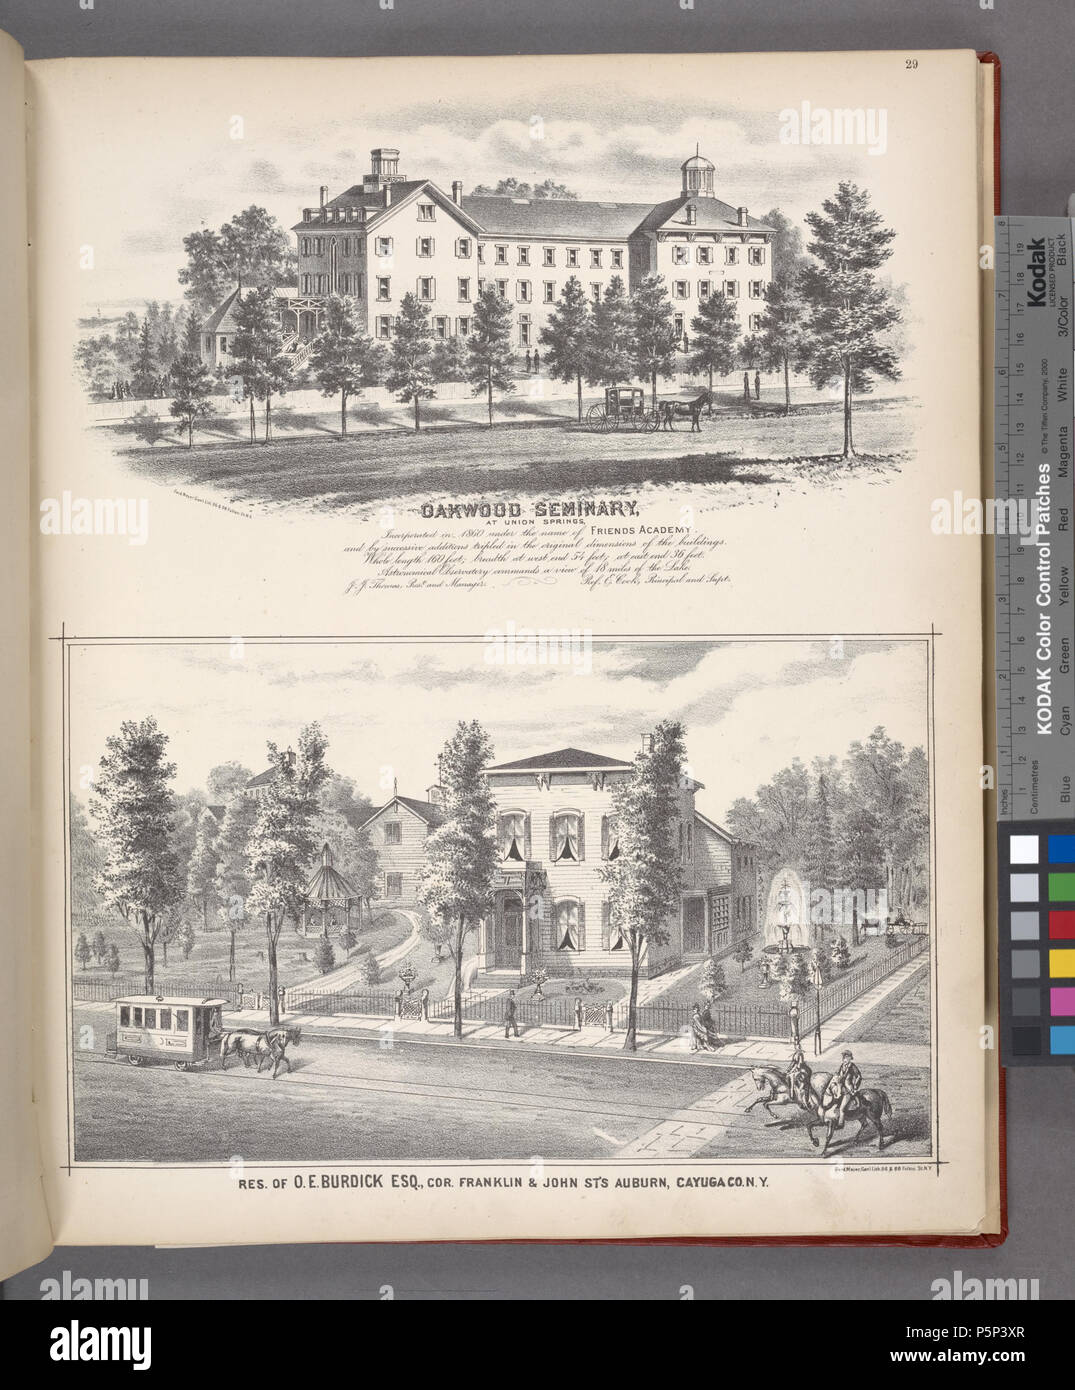 N/A. 'Oakwood Seminary; Res. of O.E. Burdick ESQ., Cor. Franklin and John St's Auburn, Cayuga Co. N.Y.'; Atlases of the United States / New York / County atlas of Cayuga, New York. From recent and actual surveys and records under the superintendence of F. W. Beers. Unknown date. Ferdinand Mayer (c. 1817 - c. 1877) 1 &quot;Oakwood Seminary; Res. of O.E. Burdick ESQ., Cor. Franklin and John St's Auburn, Cayuga Co. N.Y.&quot; NYPL1583065 Stock Photo